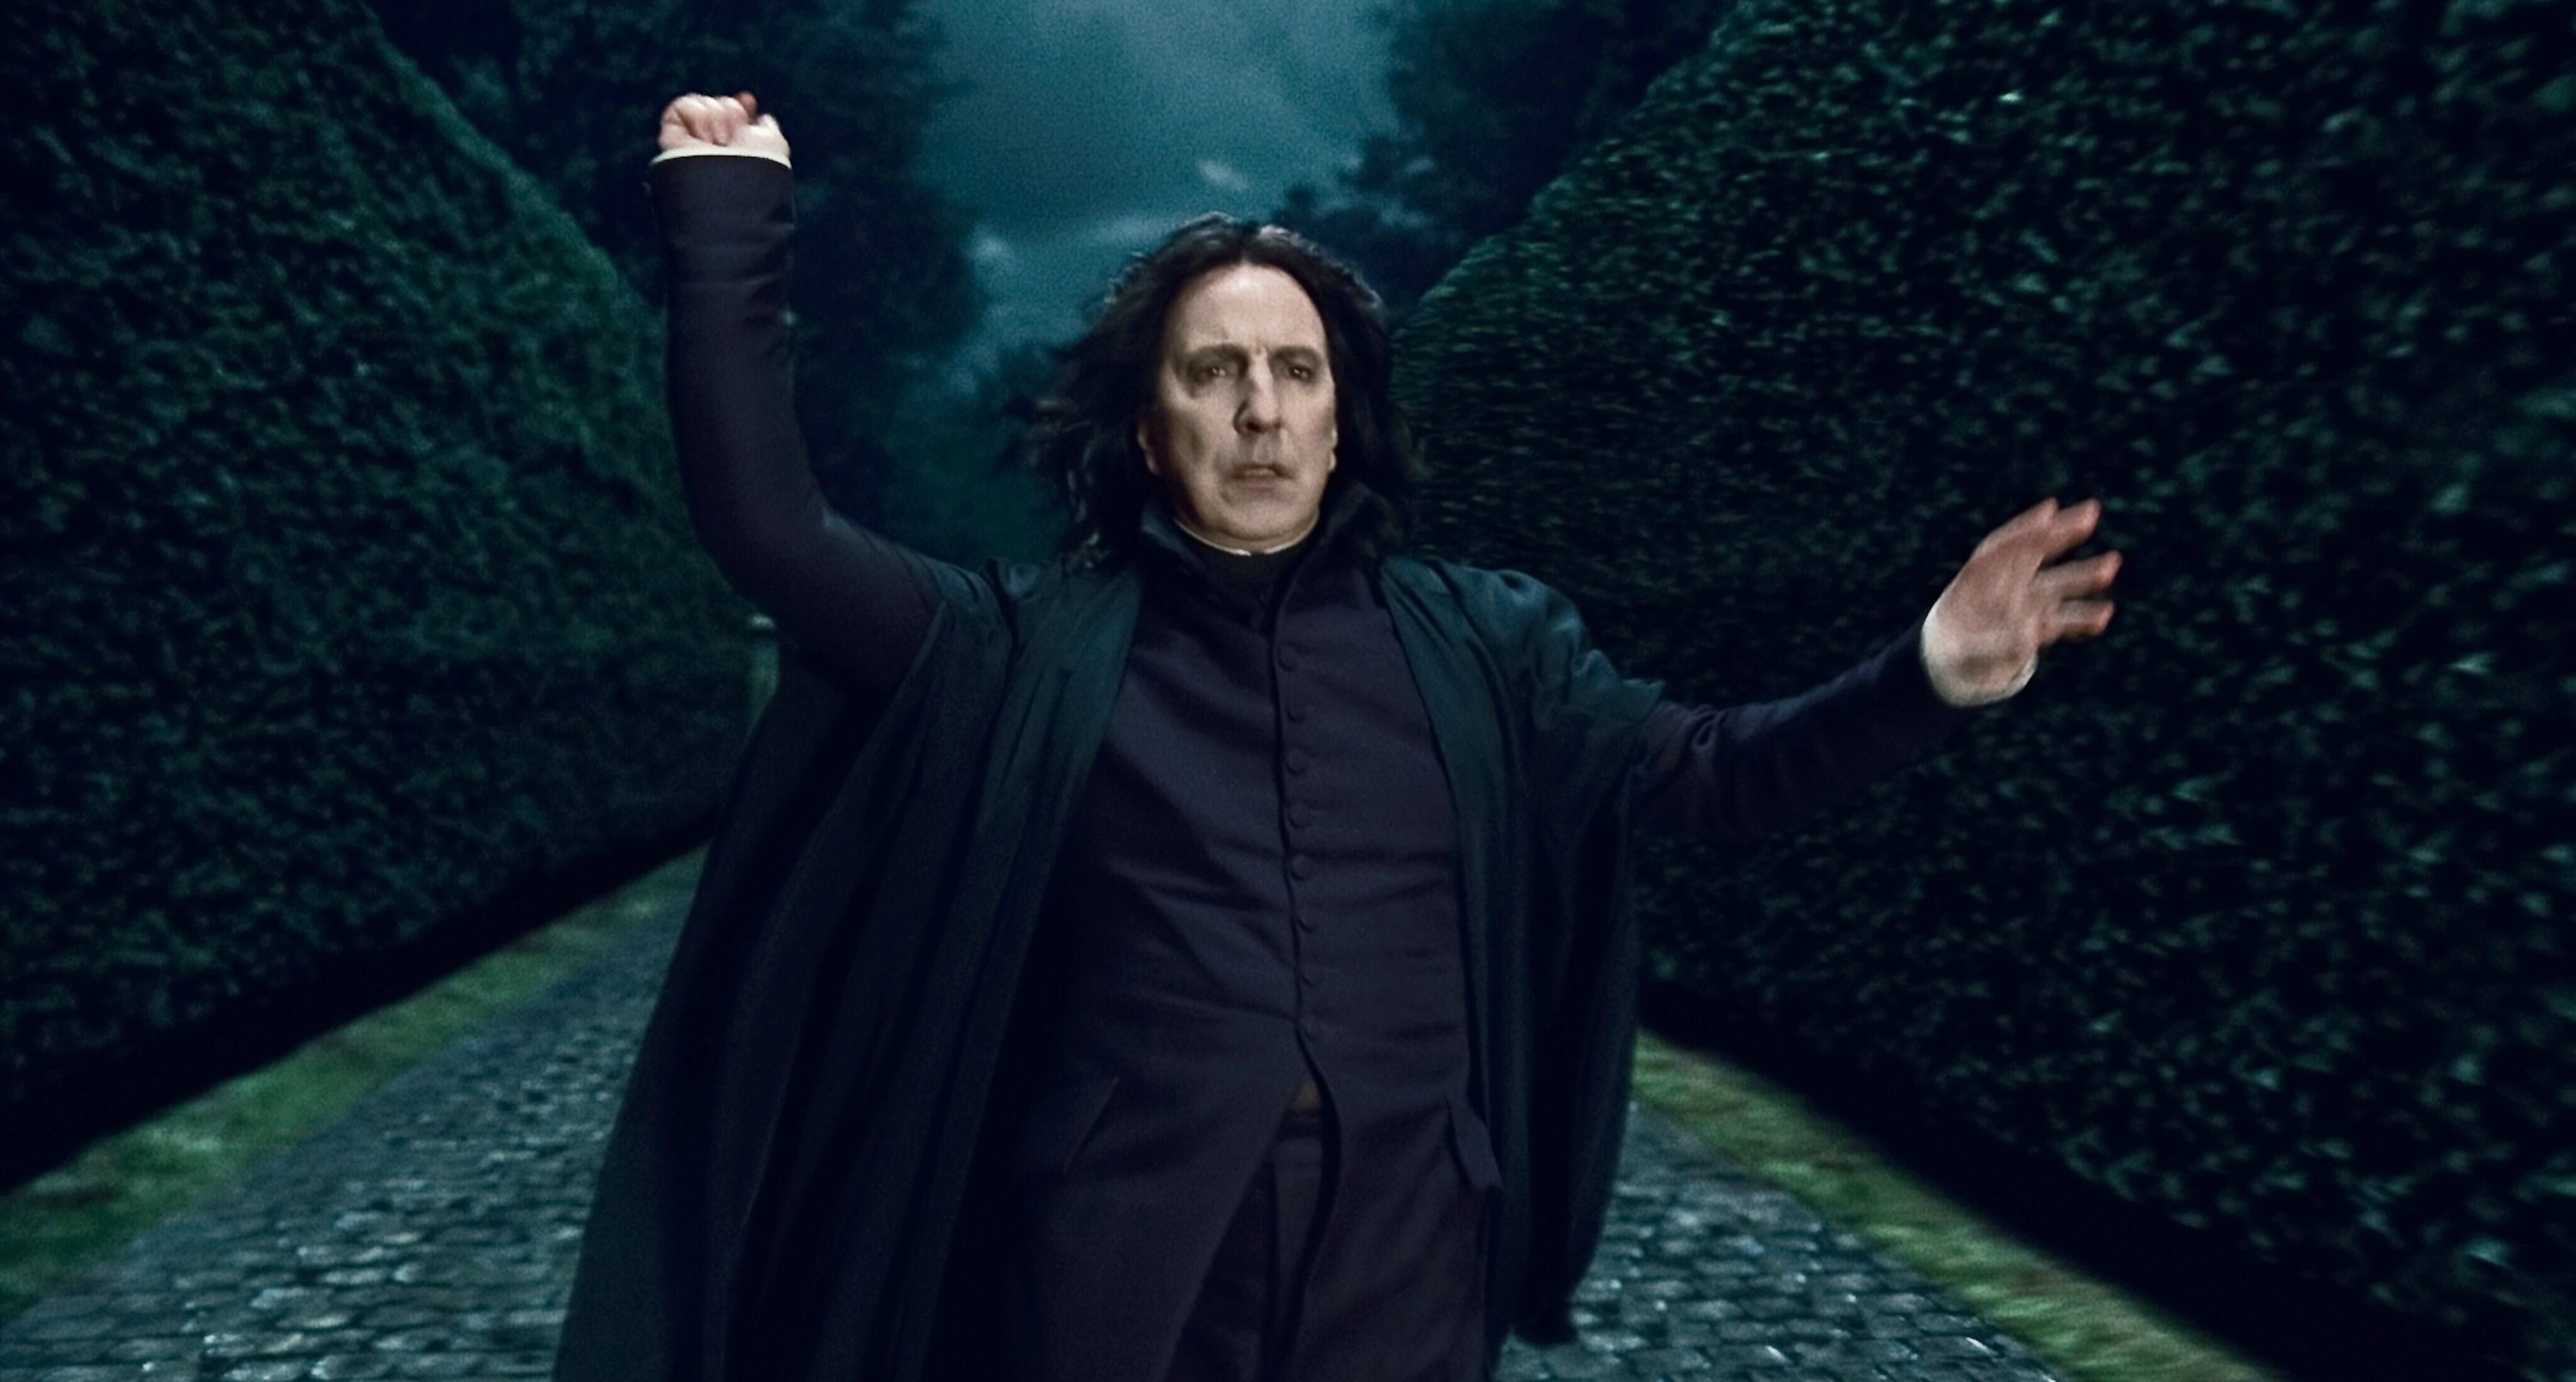 severus snape, alan rickman, harry potter, movie, harry potter and the deathly hallows: part 1